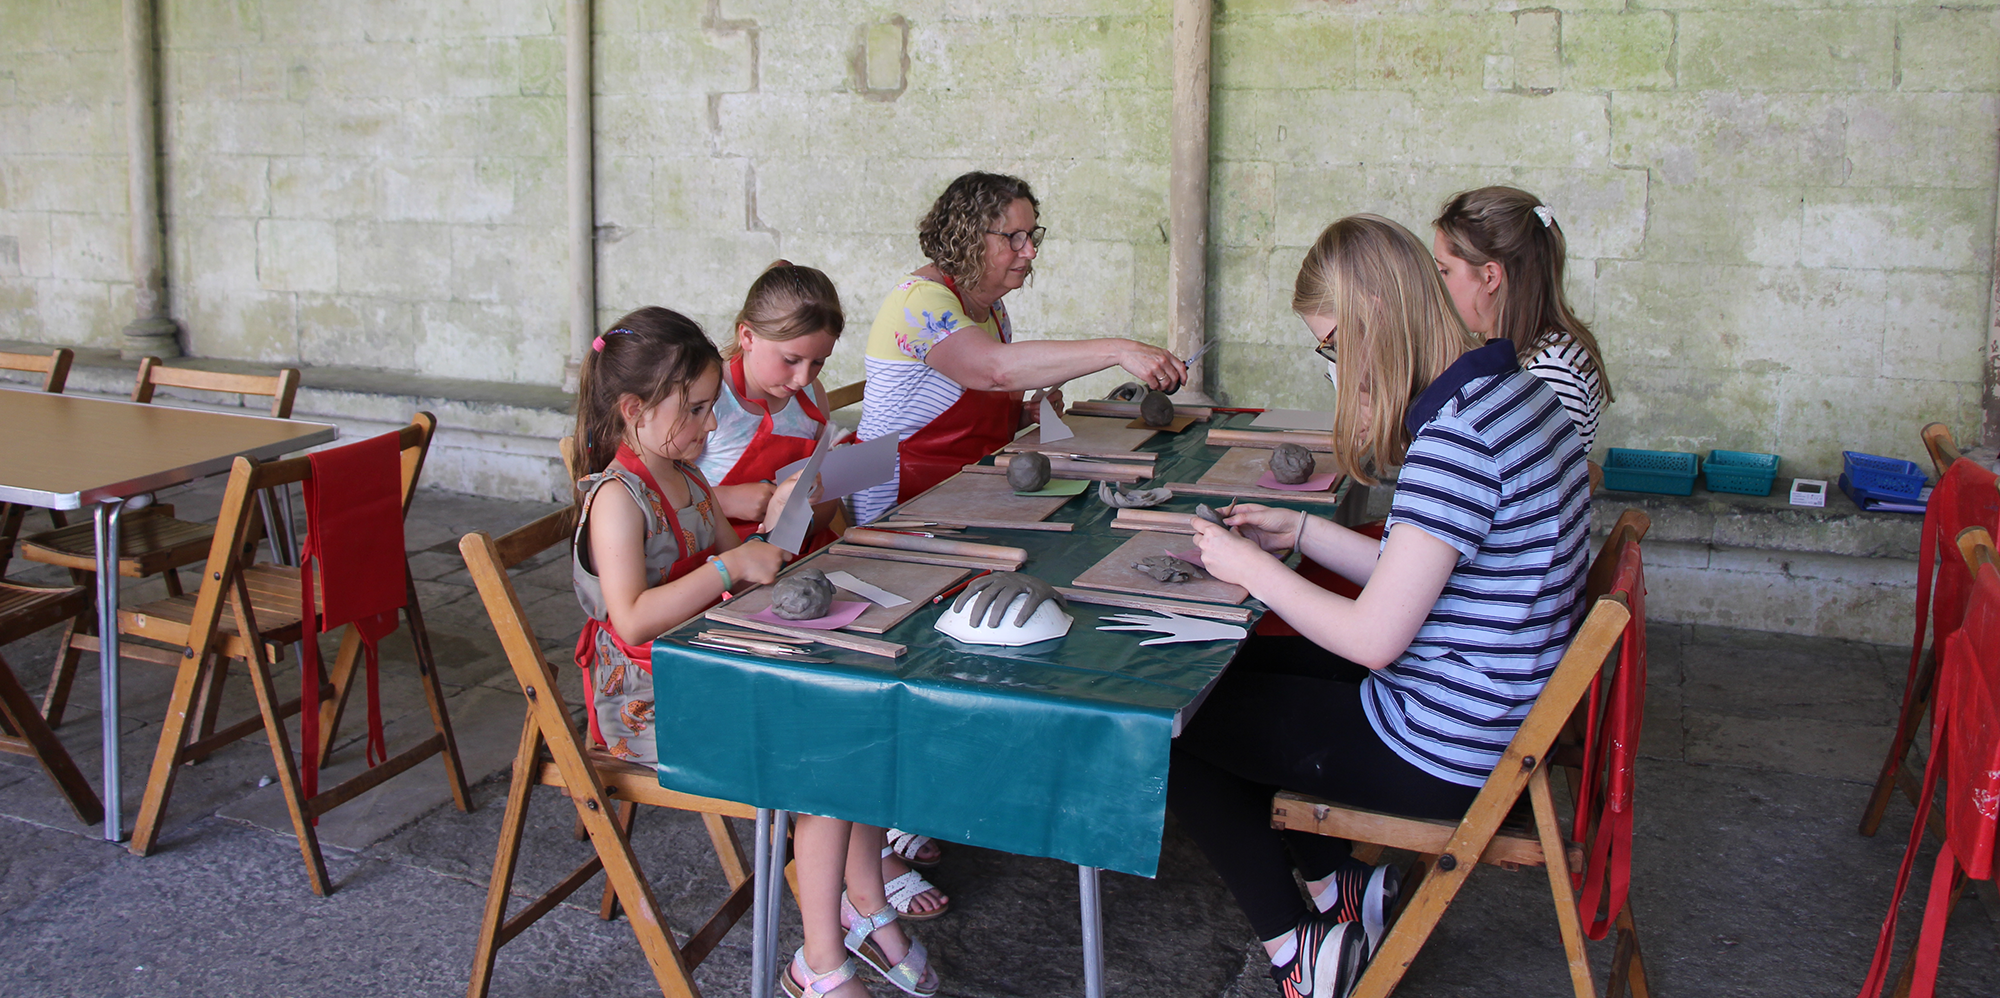 Children and adults sat around a table, taking part in a clay activity